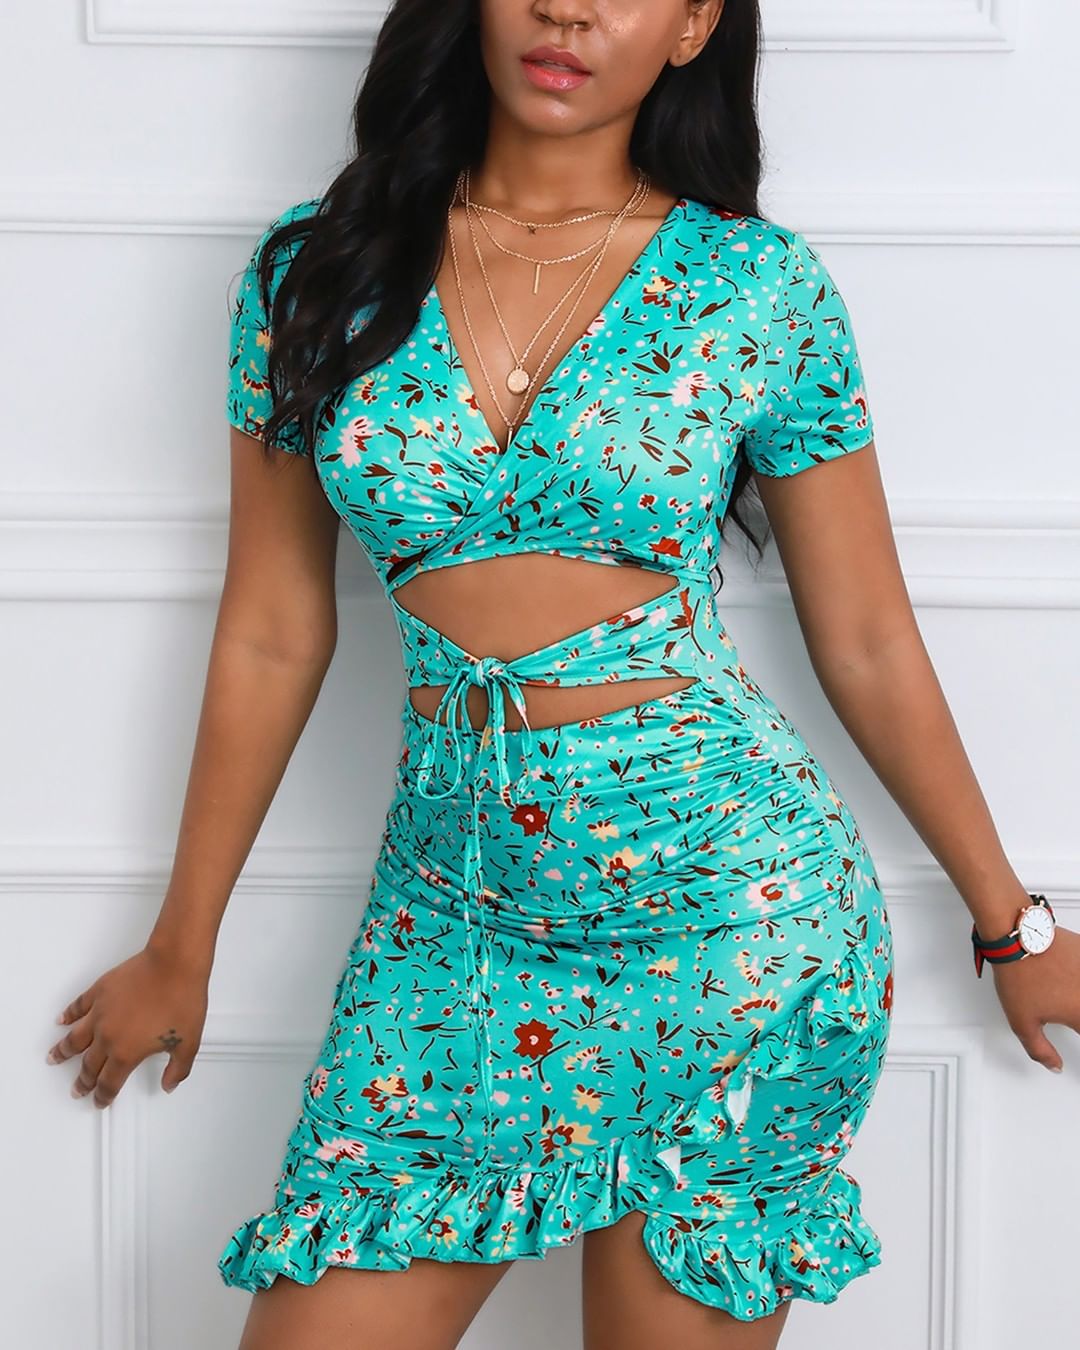 boutiquefeel_official - Floral Print Cutout Ruffles Ruched Dress⁠
Search SKU：YDF3442B⁠
Shop WEB ：https://www.boutiquefeel.com ⁠
 #style #beautiful